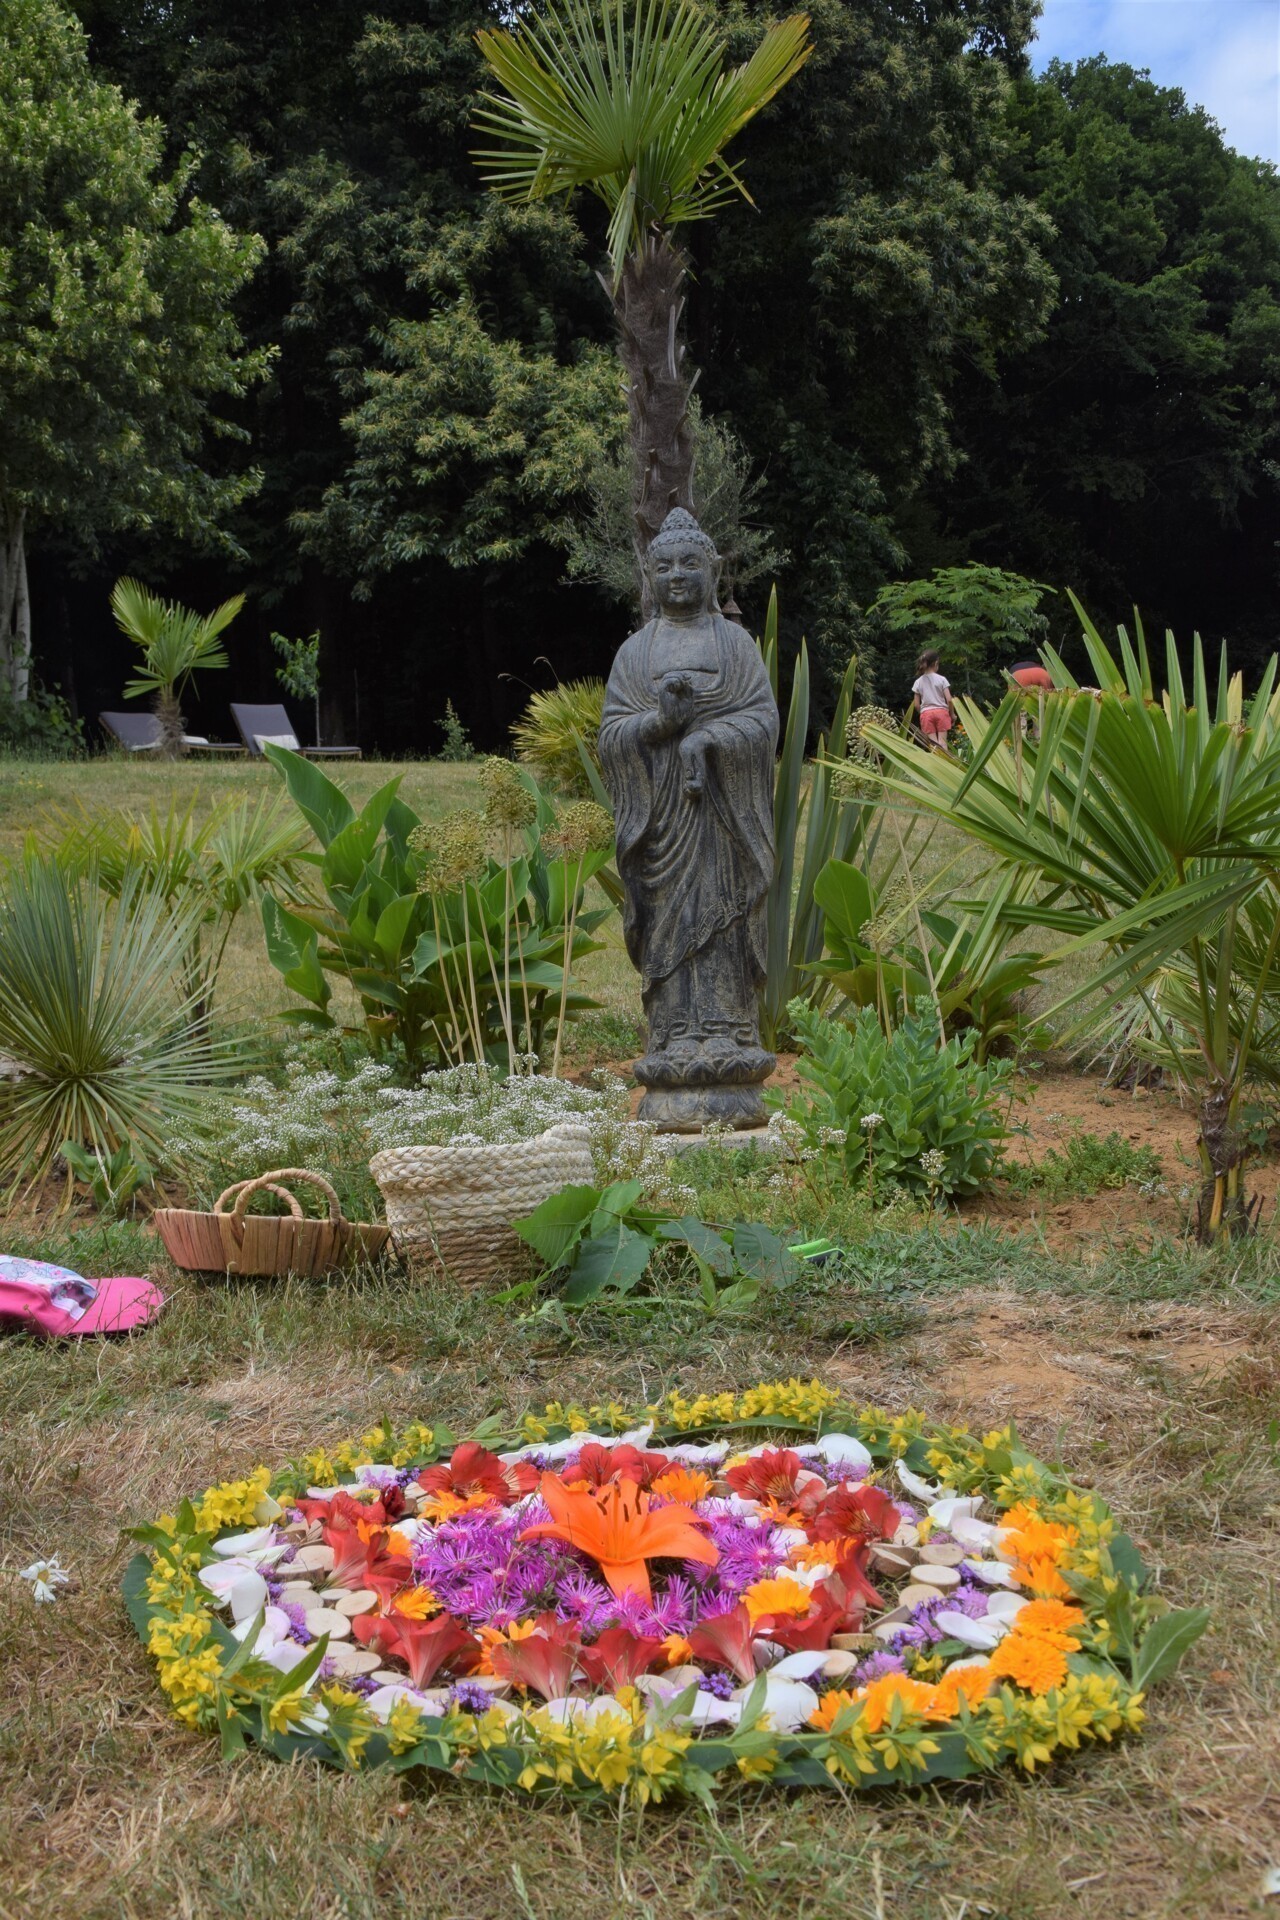 The plant mandala of Audrey and Enaïs in front of the Buddha of wisdom.